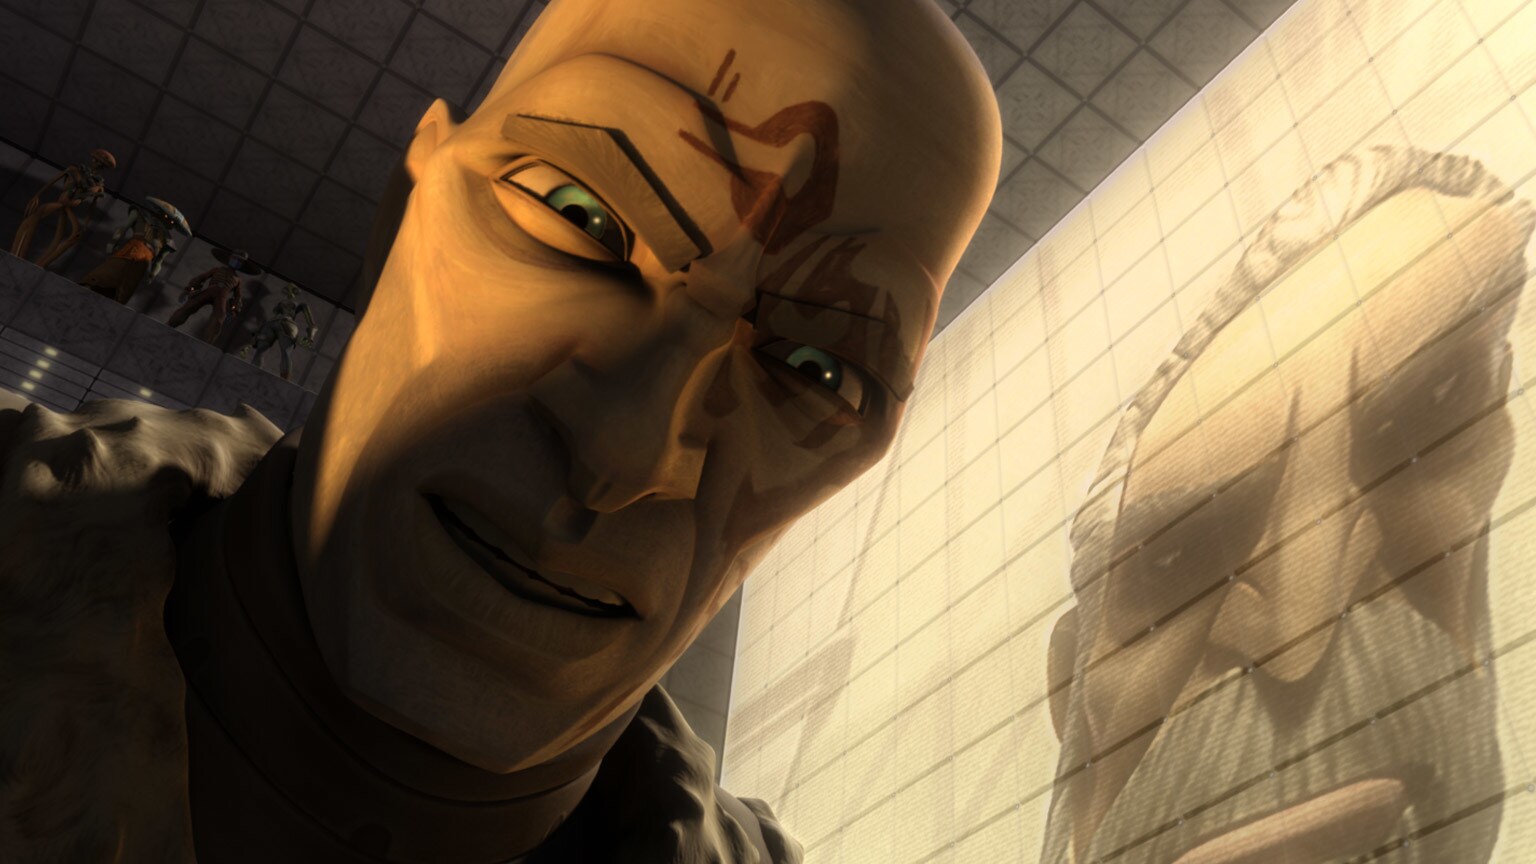 The Clone Wars Rewatch: What's In "The Box"?